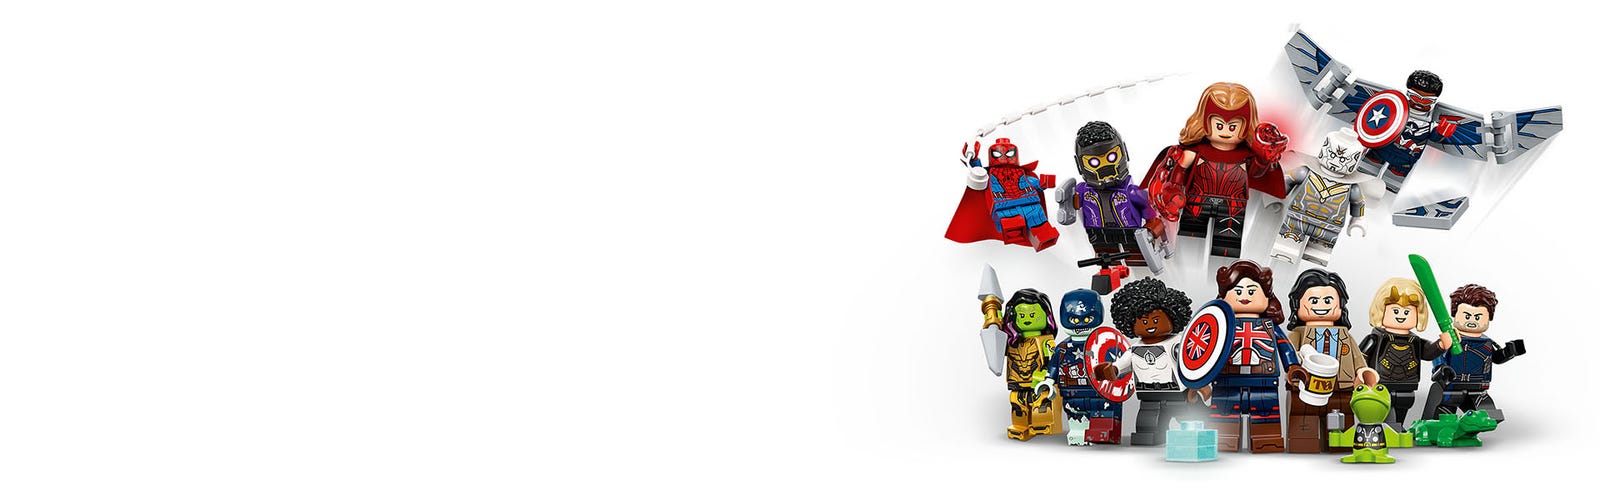 LEGO Minifigures Marvel Studios 71031 Building Toy for Fans of Super Hero  Toys (1 of 12 to Collect) 